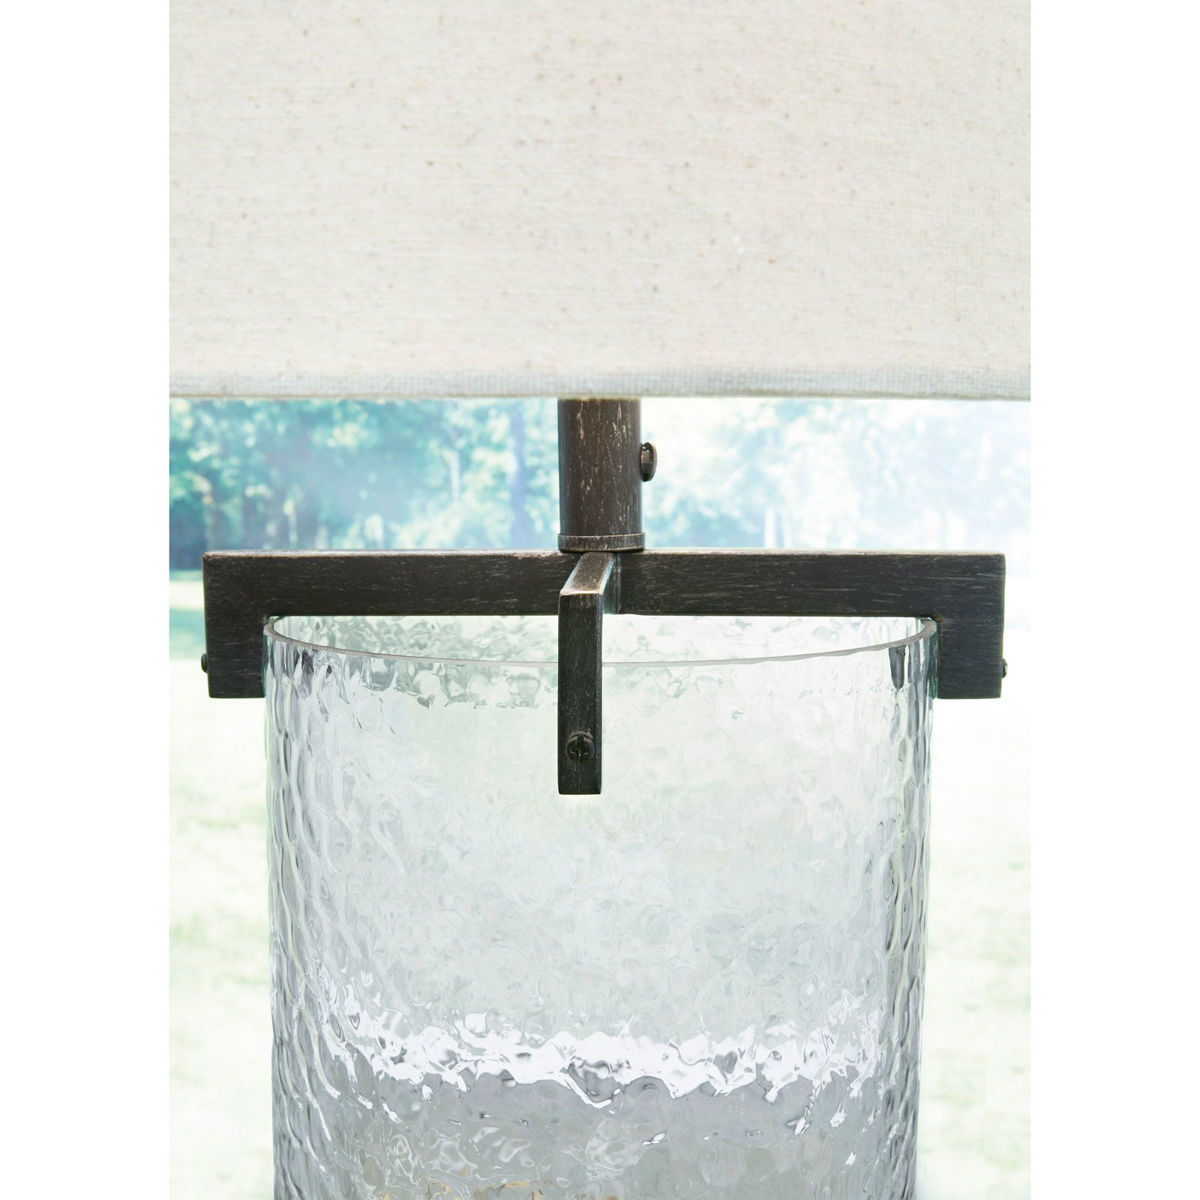 Picture of Fentonley Table Lamp